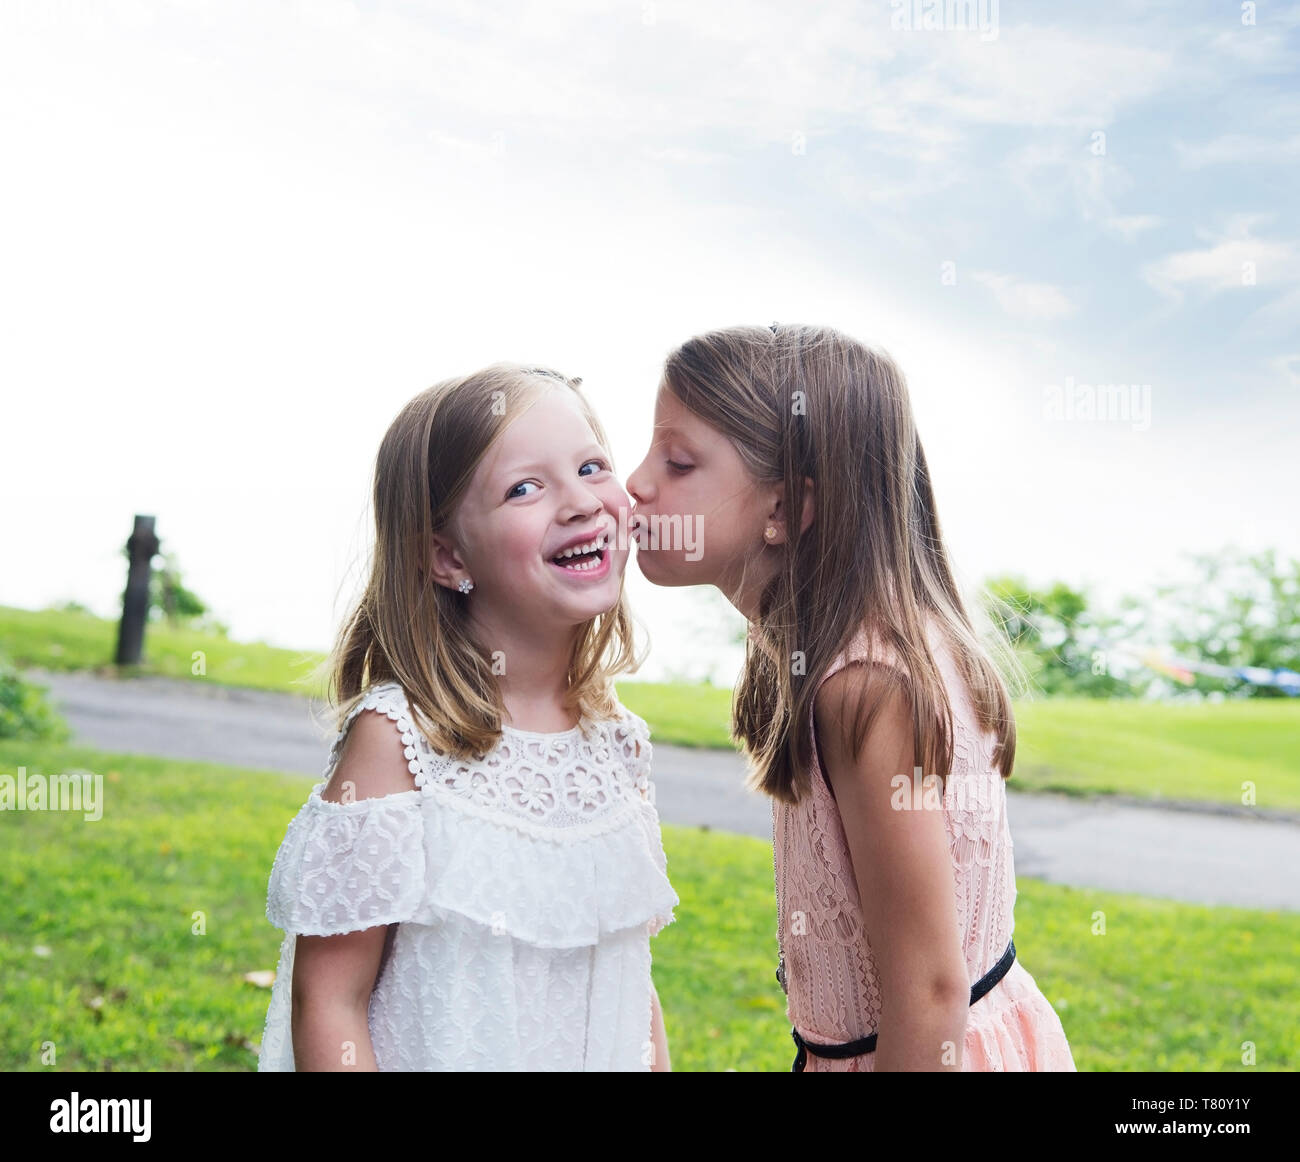 Two sisters, young children kissing in a park during summer Stock Photo